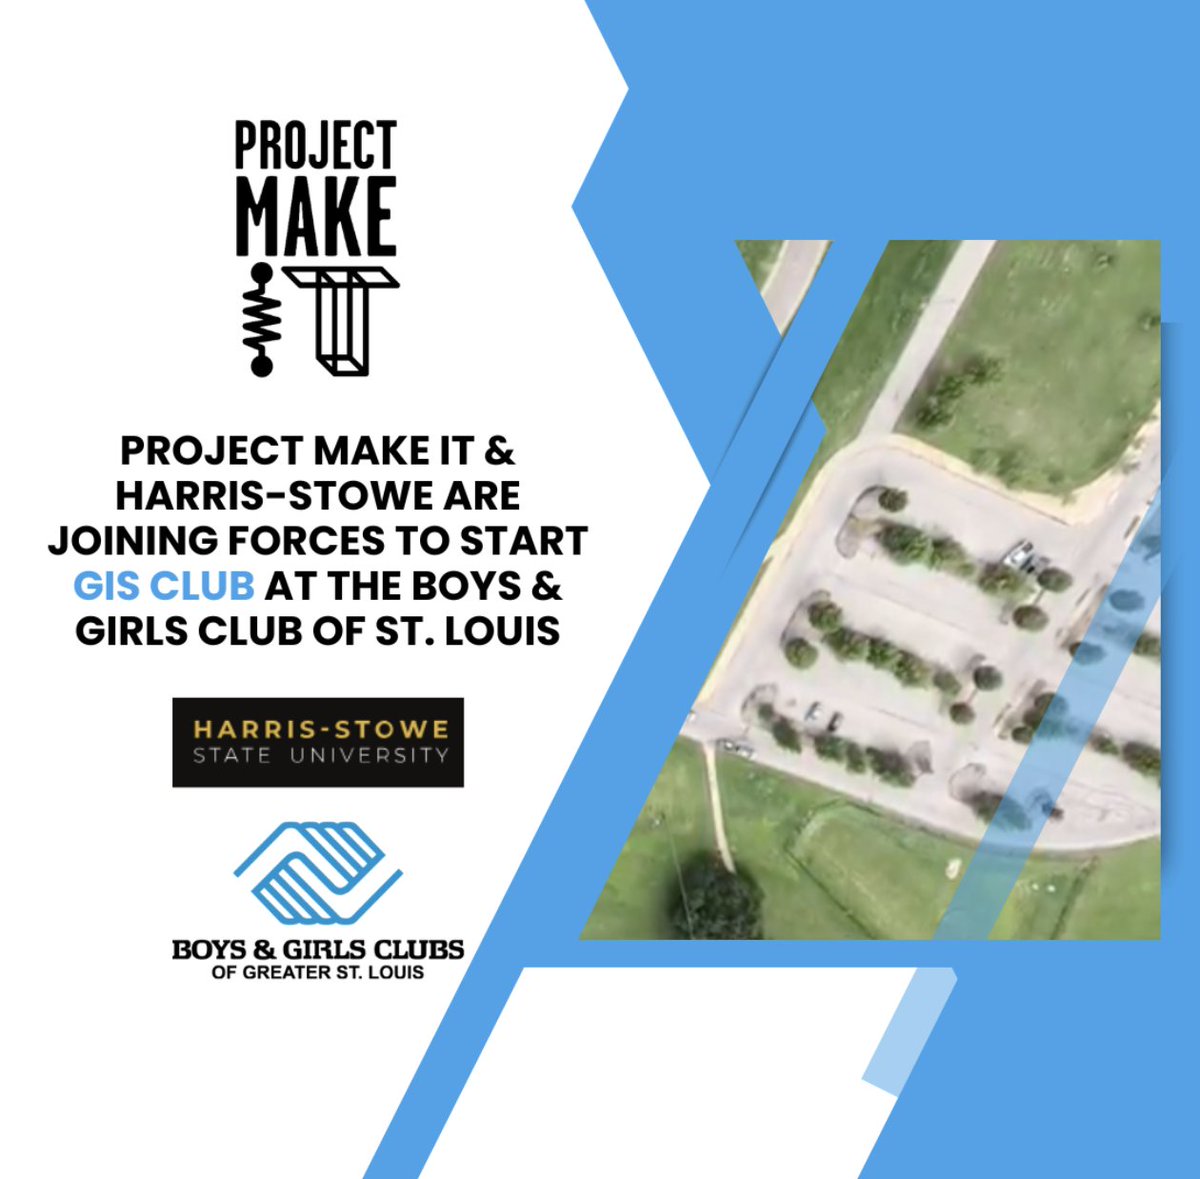 We are thrilled to announce our partnership with @HarrisStowe! Our high school students will be starting GIS Club soon with @bgcstl, and we are so excited to have Harris Stowe teach them how to use the ArC GIS Software.

Learn more: projectmakeit.org.